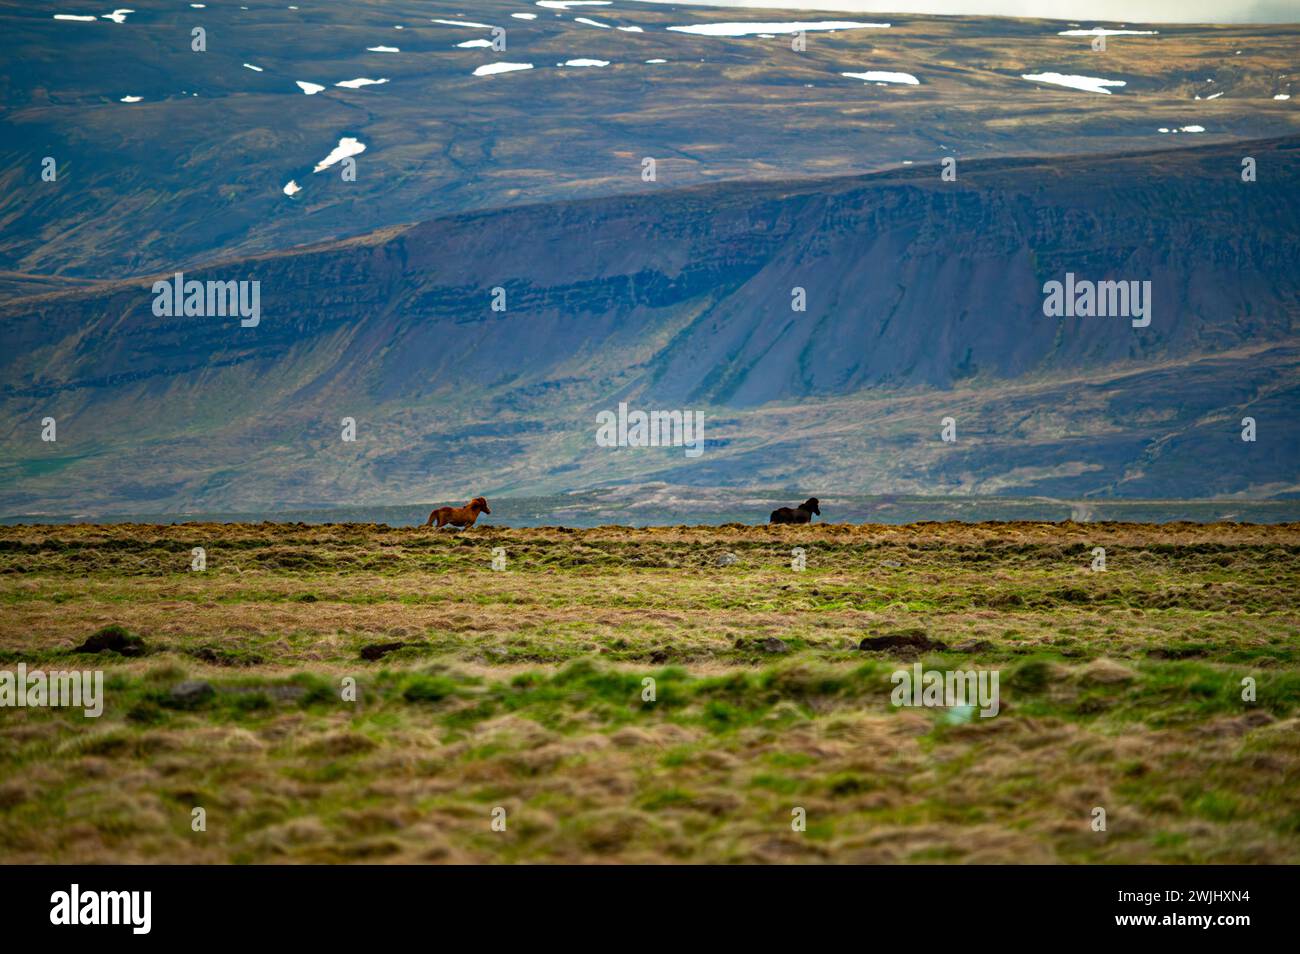 Iceland's vast terrain of moss-covered lava, a serene backdrop for grazing horses, with distant snow patches. Stock Photo